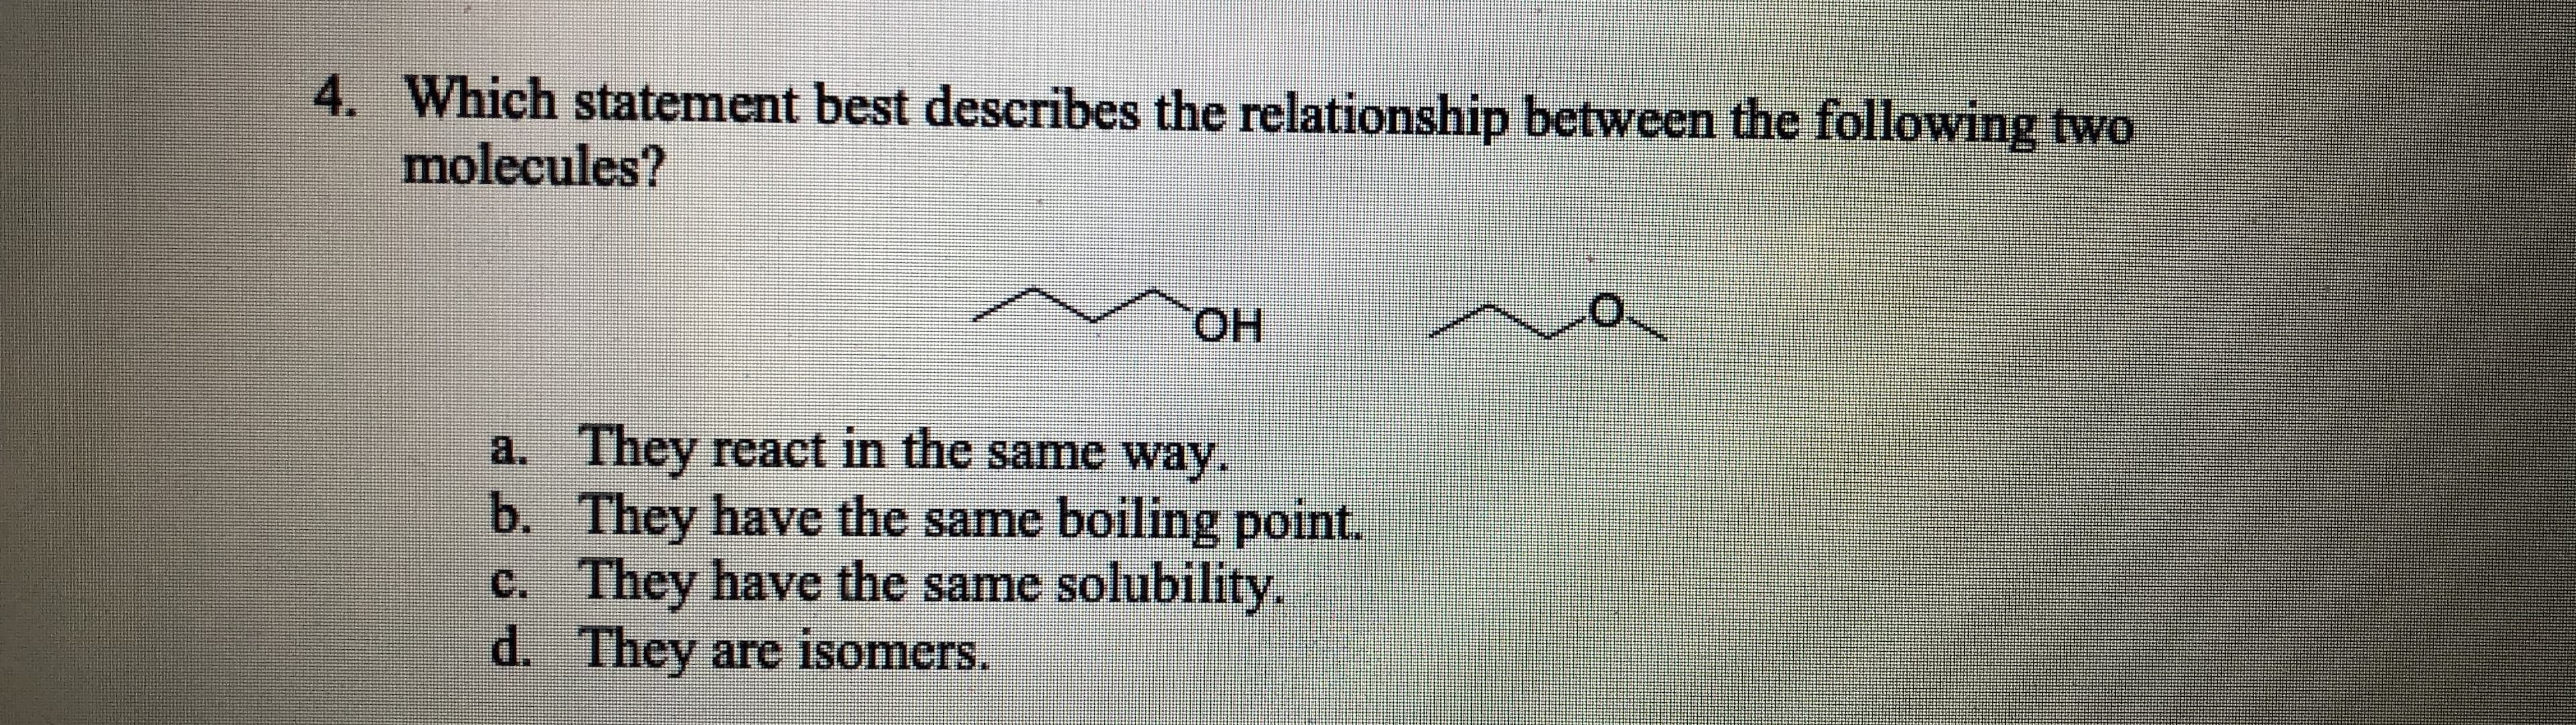 4. Which statement best describes the relationship between the following two
molecules?
HO.
a. They react in the same way.
b. They have the same boiling point.
c. They have the same solubility.
d. They are isomers.
